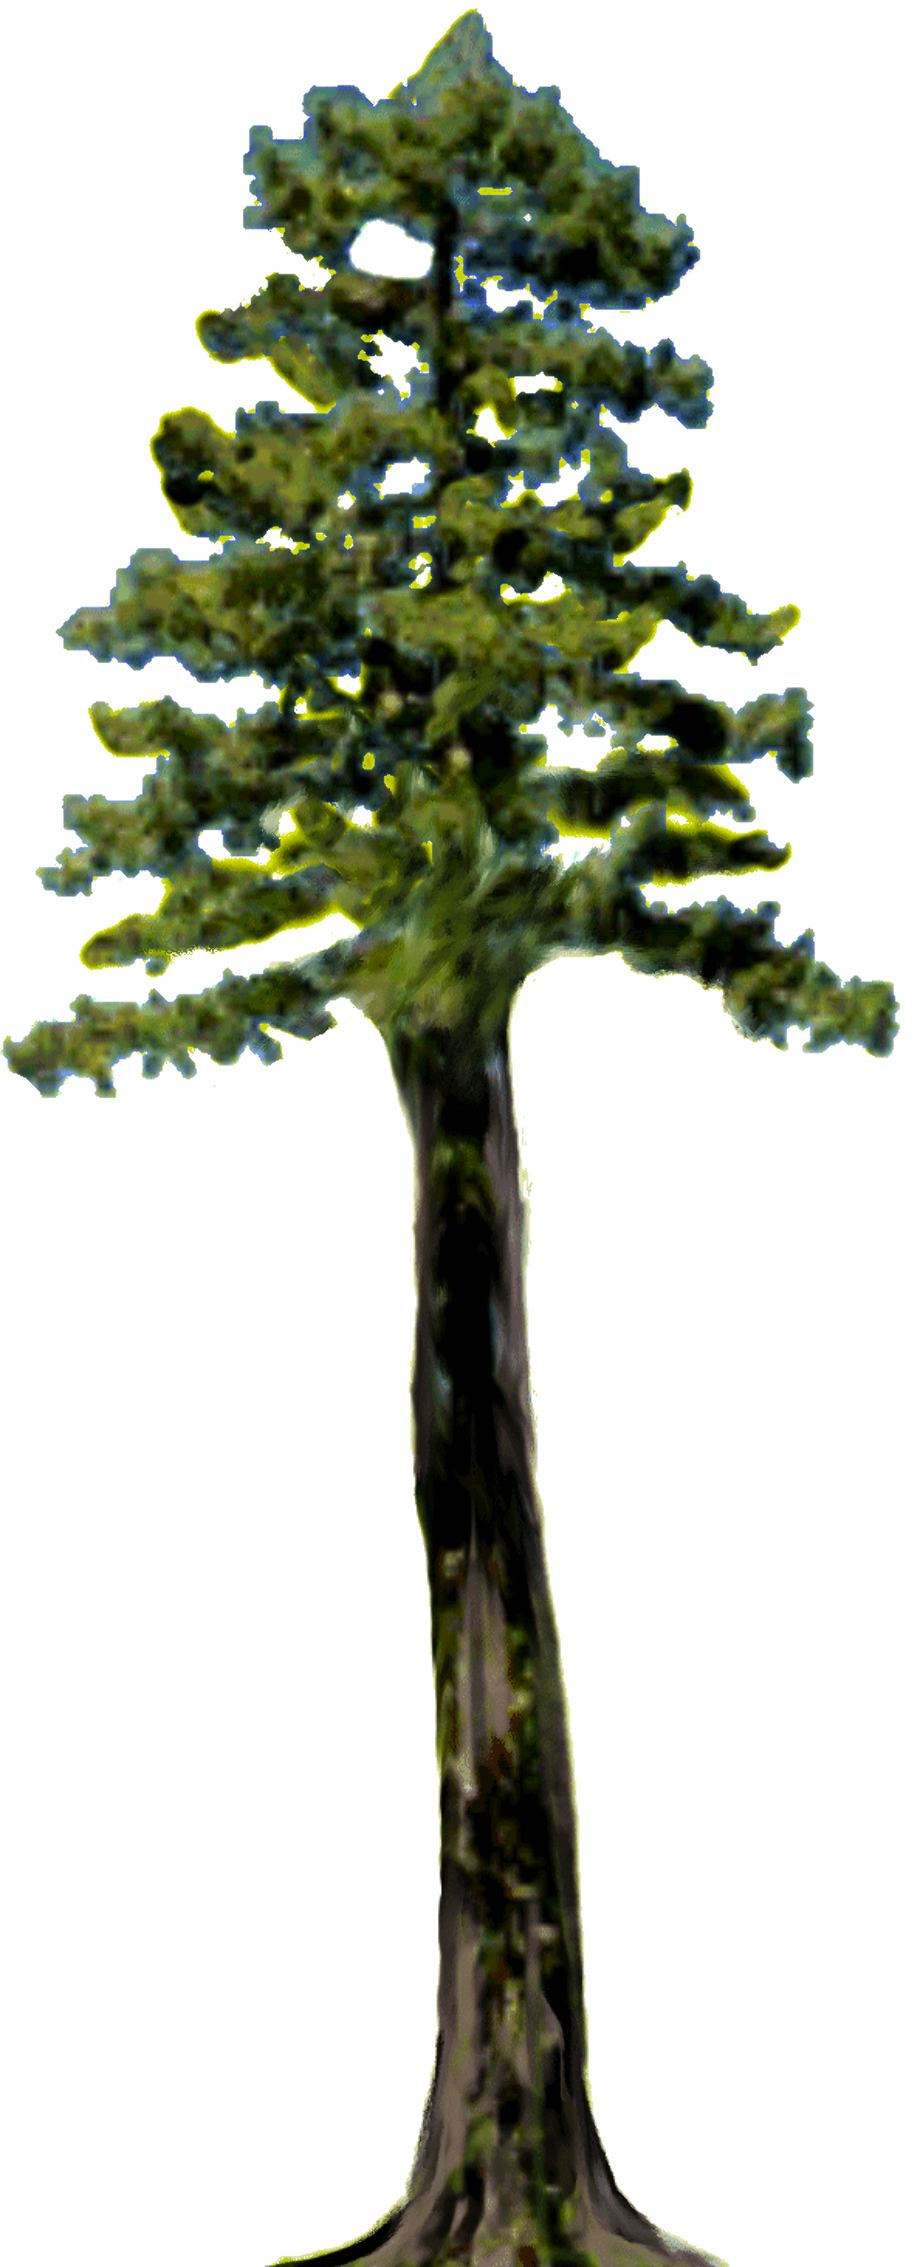 Download High Quality Tree clipart redwood Transparent PNG Images - Art